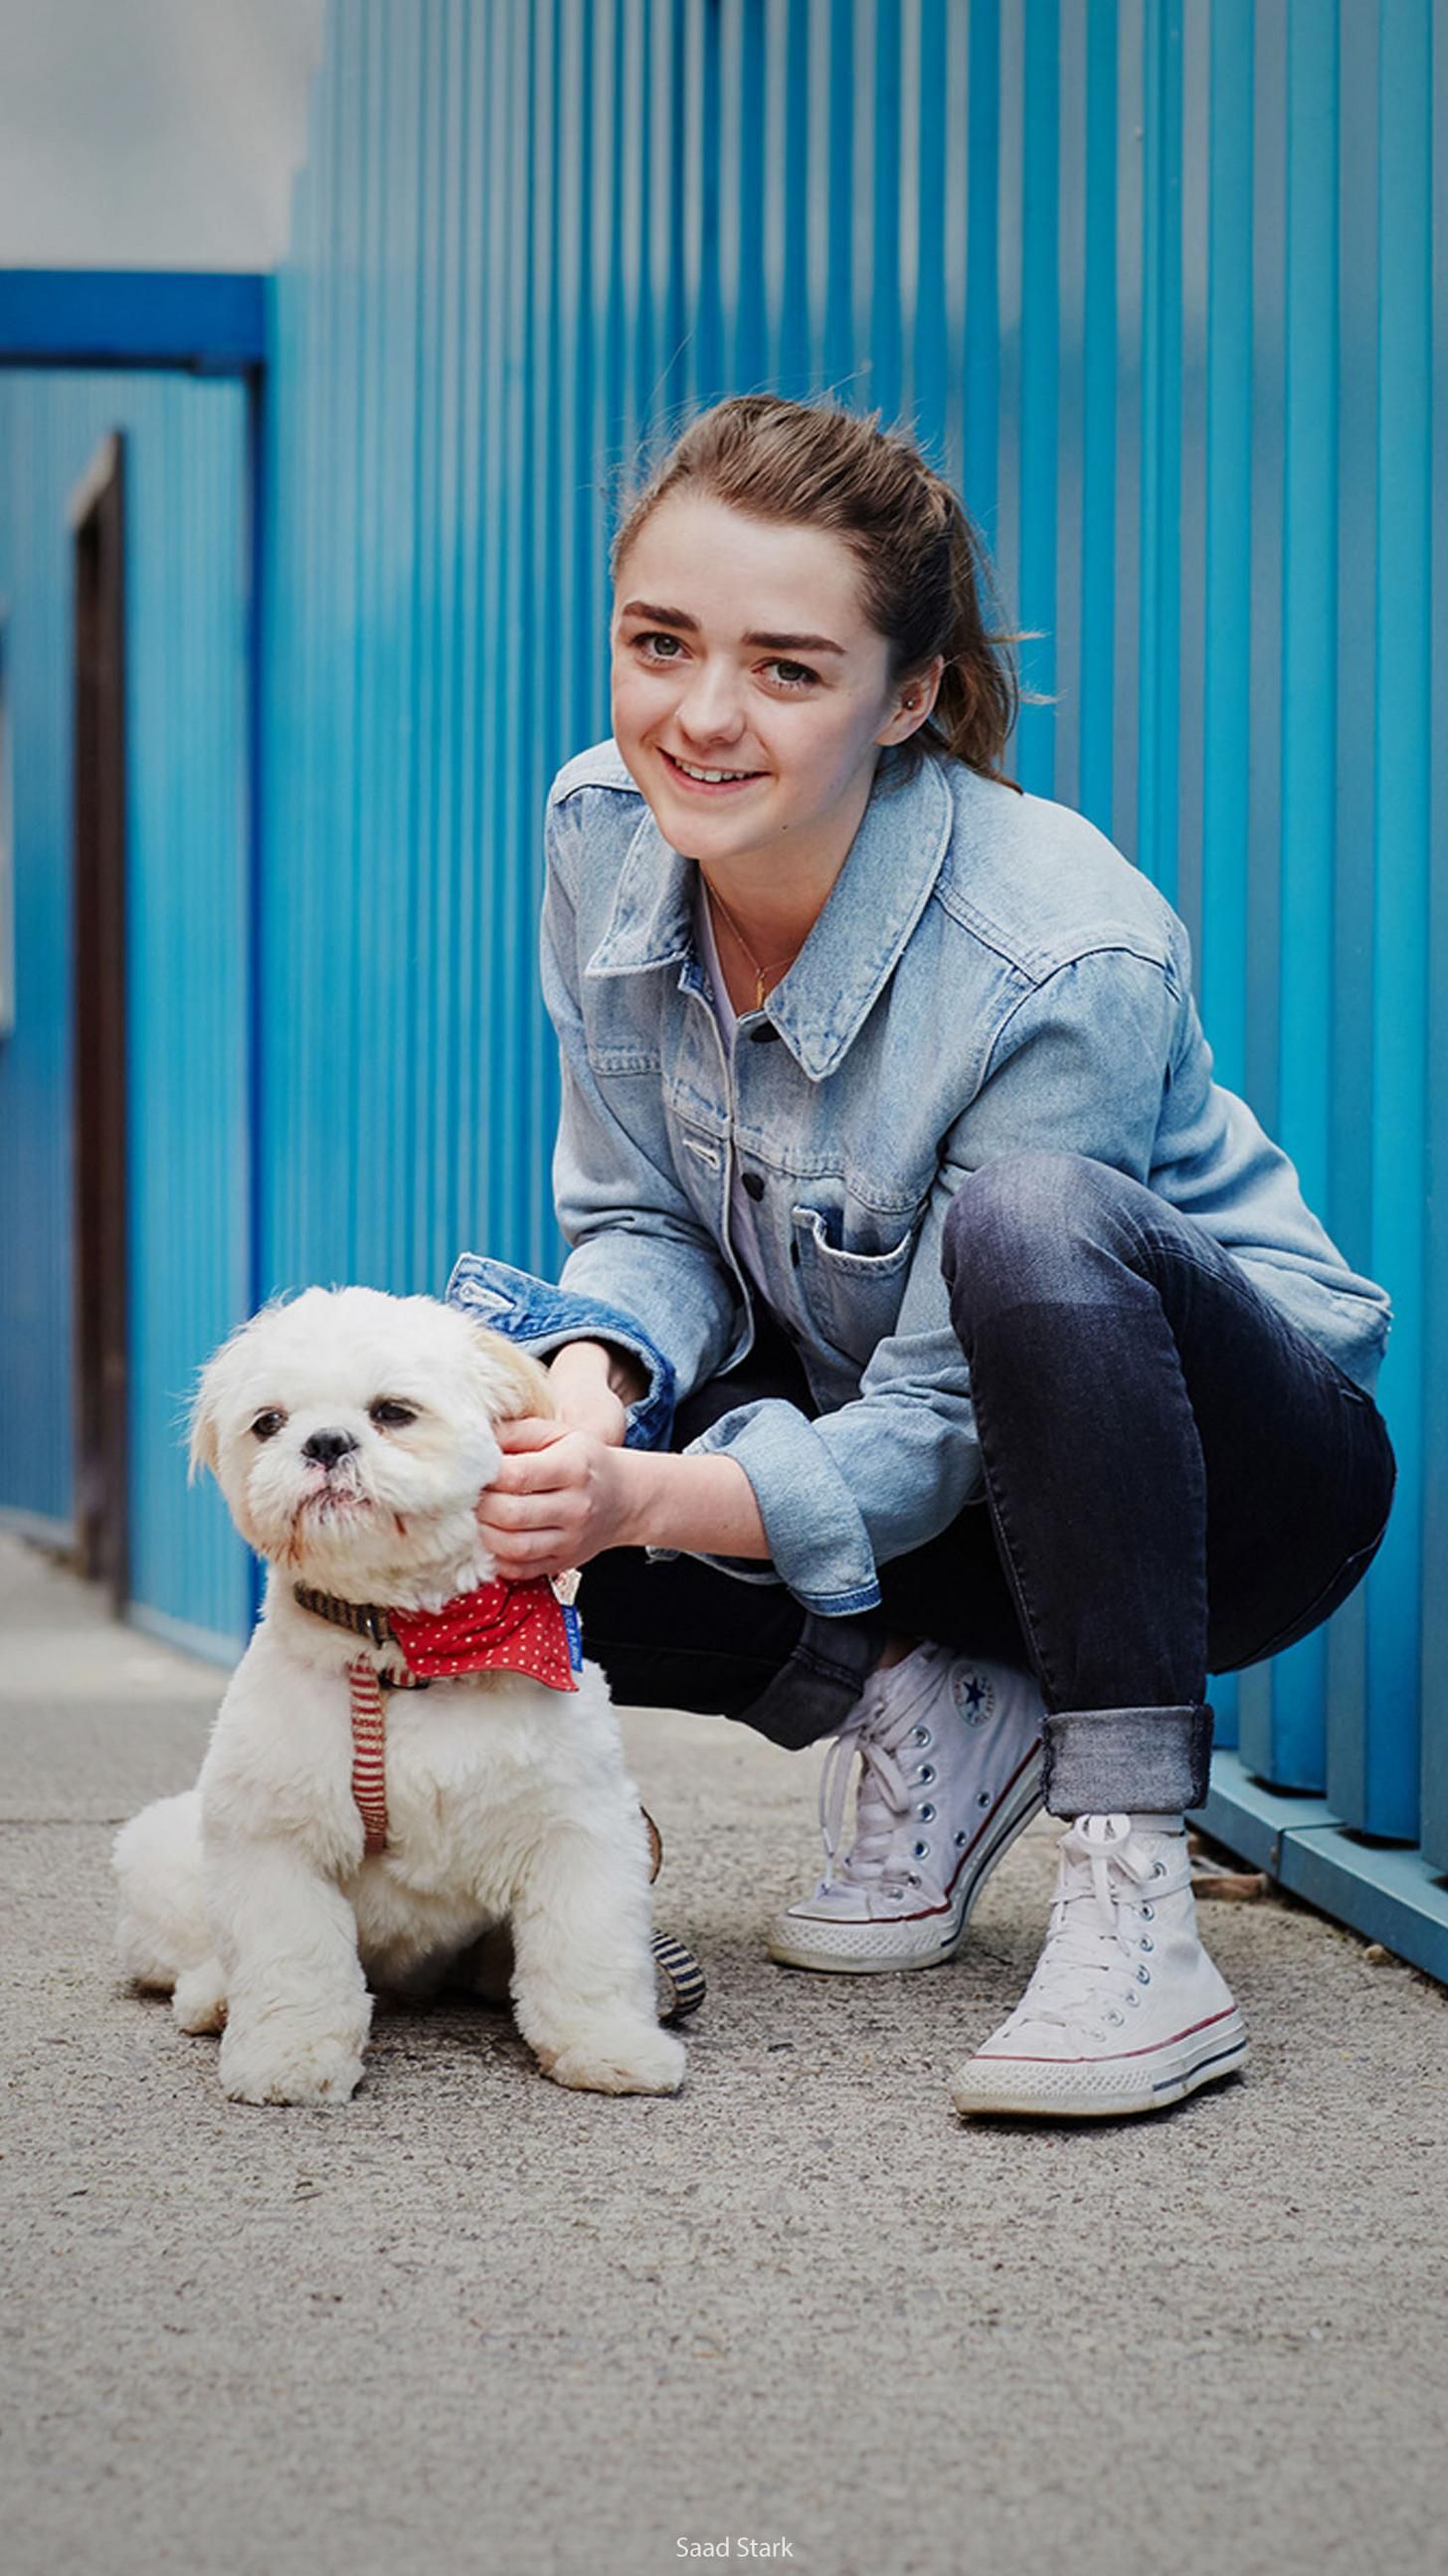 Maisie Williams Wallpaper - Maisie Williams Wallpaper Iphone , HD Wallpaper & Backgrounds